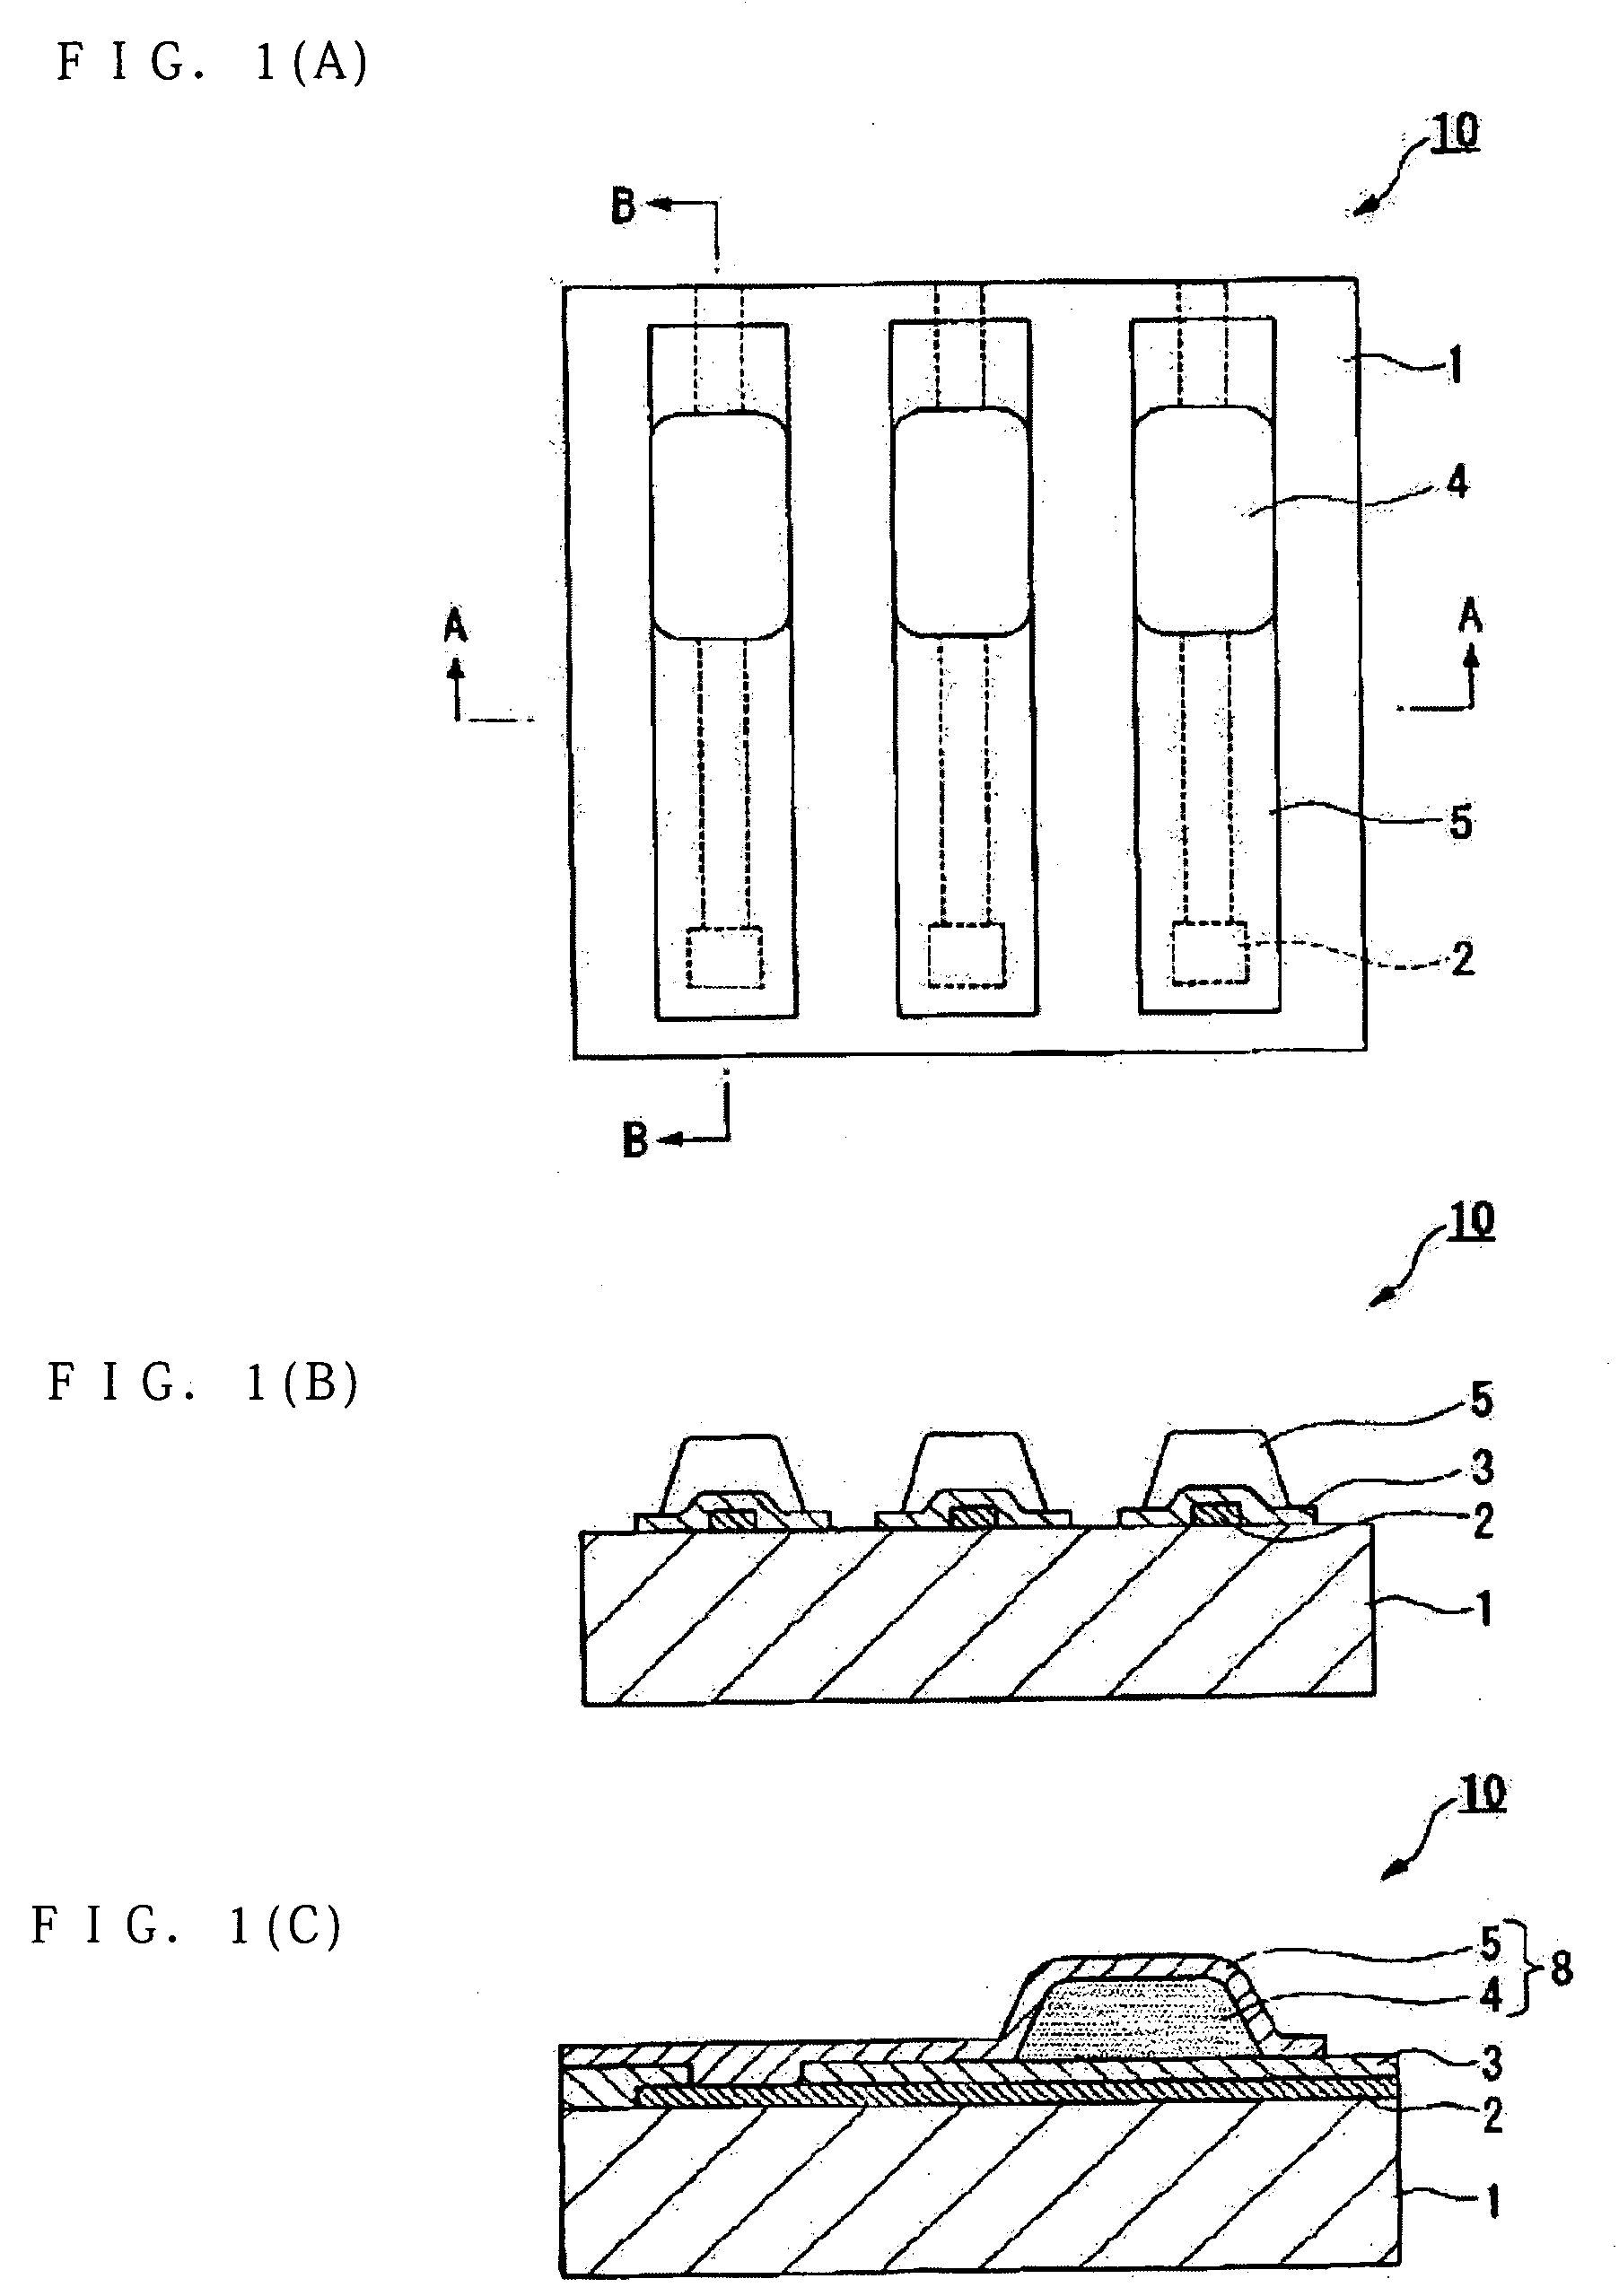 Method for mounting semiconductor device, as well as circuit board, electrooptic device, and electronic device